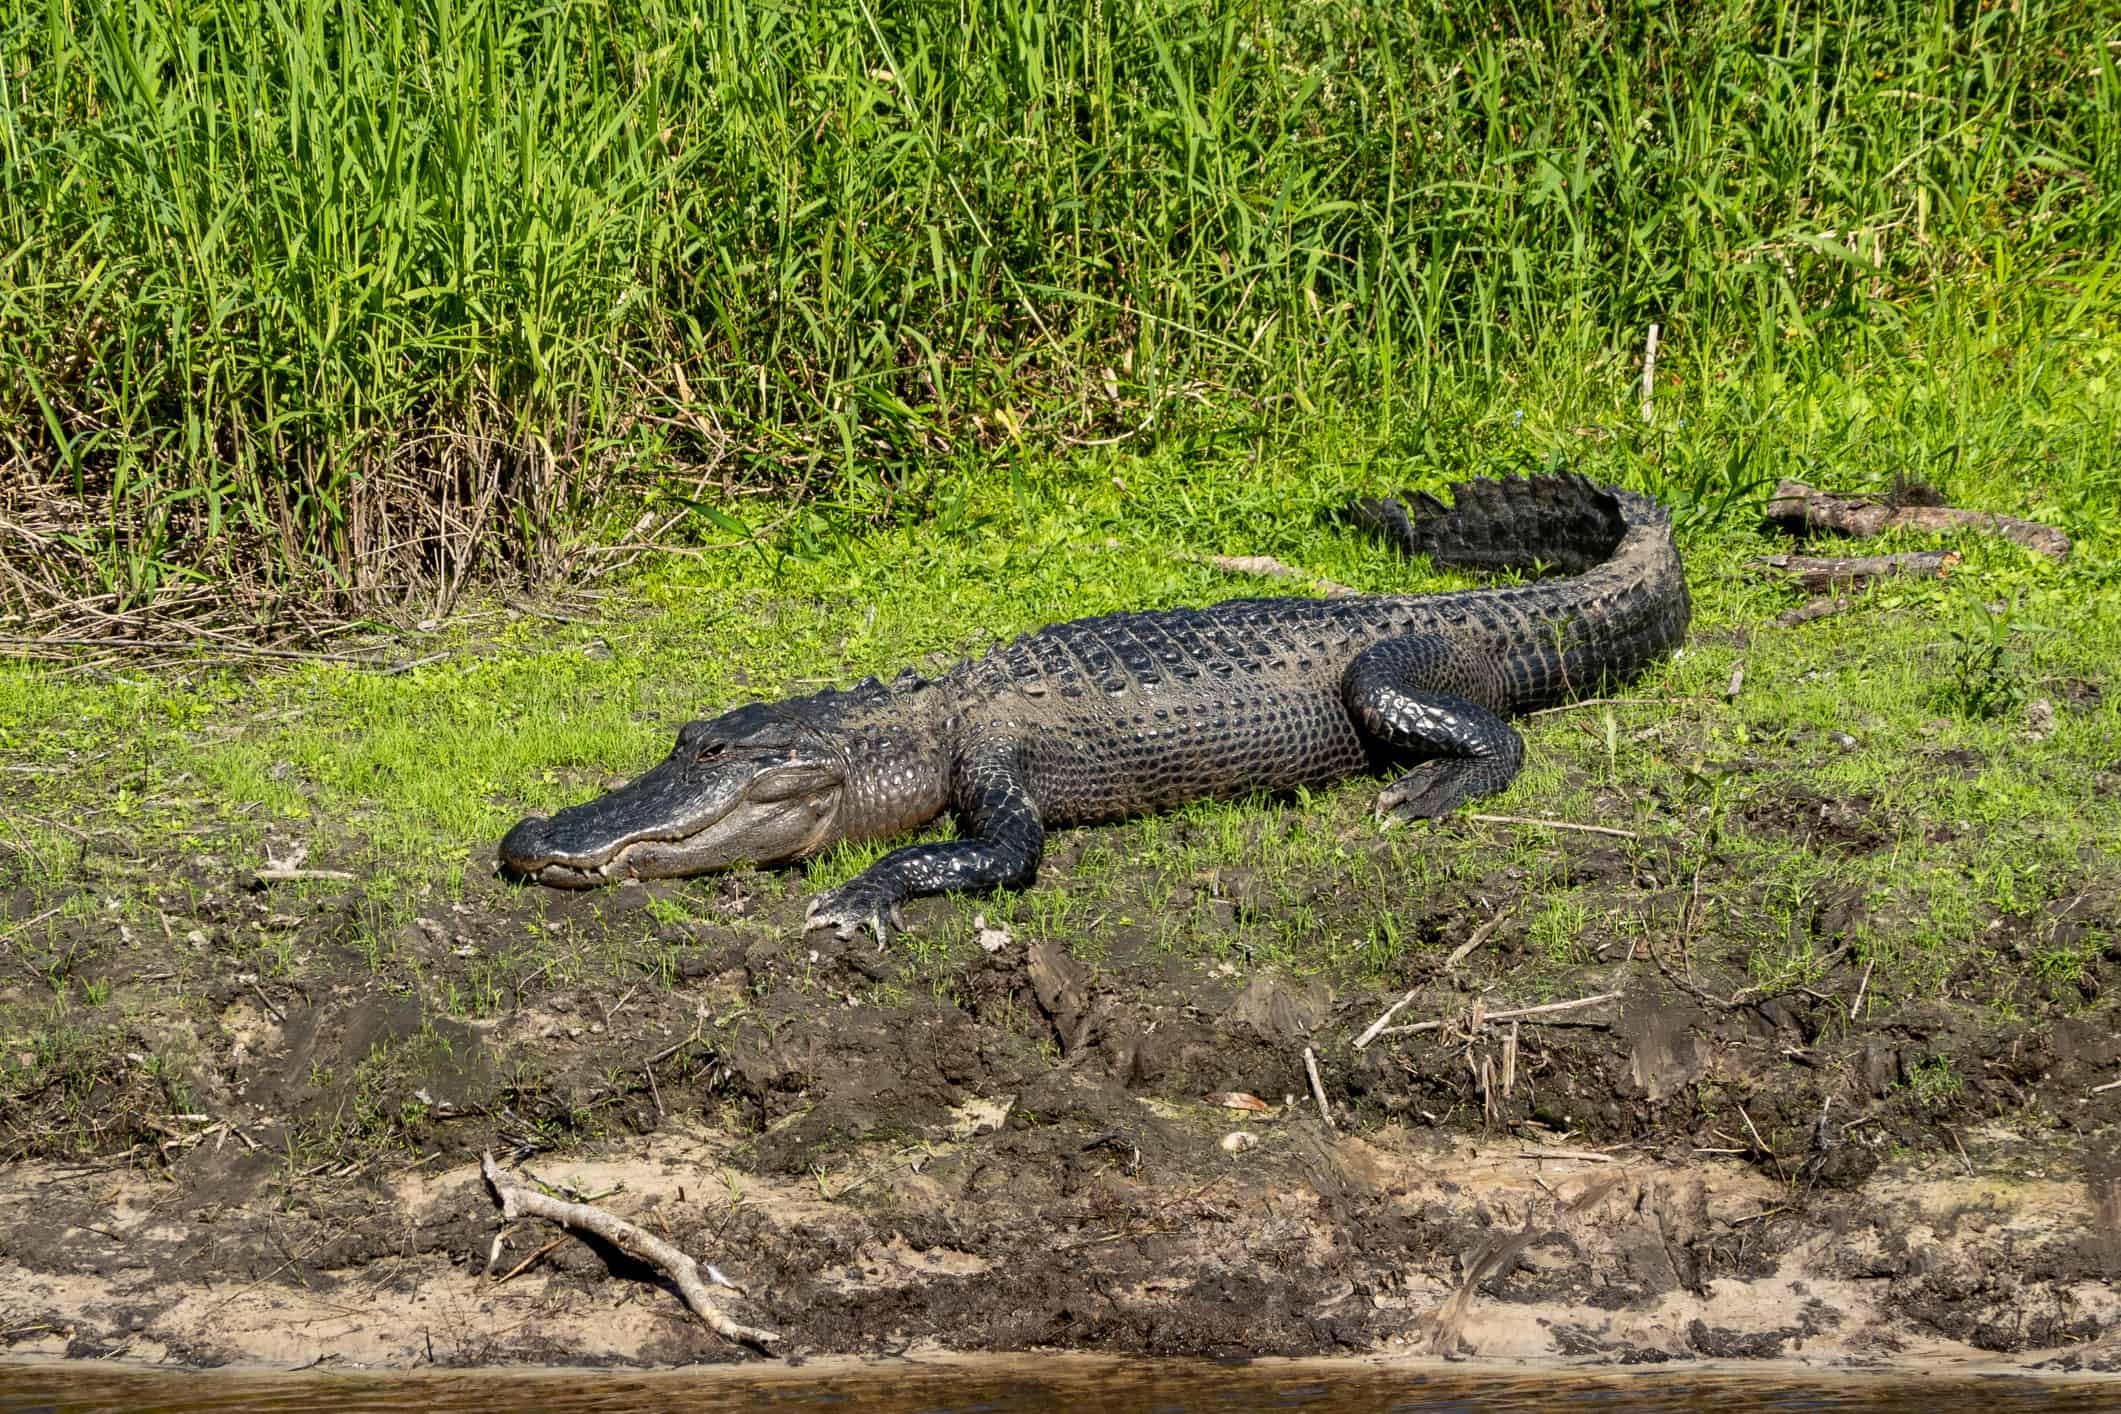 Alligator Basks in the Sun on a Grassy Riverbank in Florida